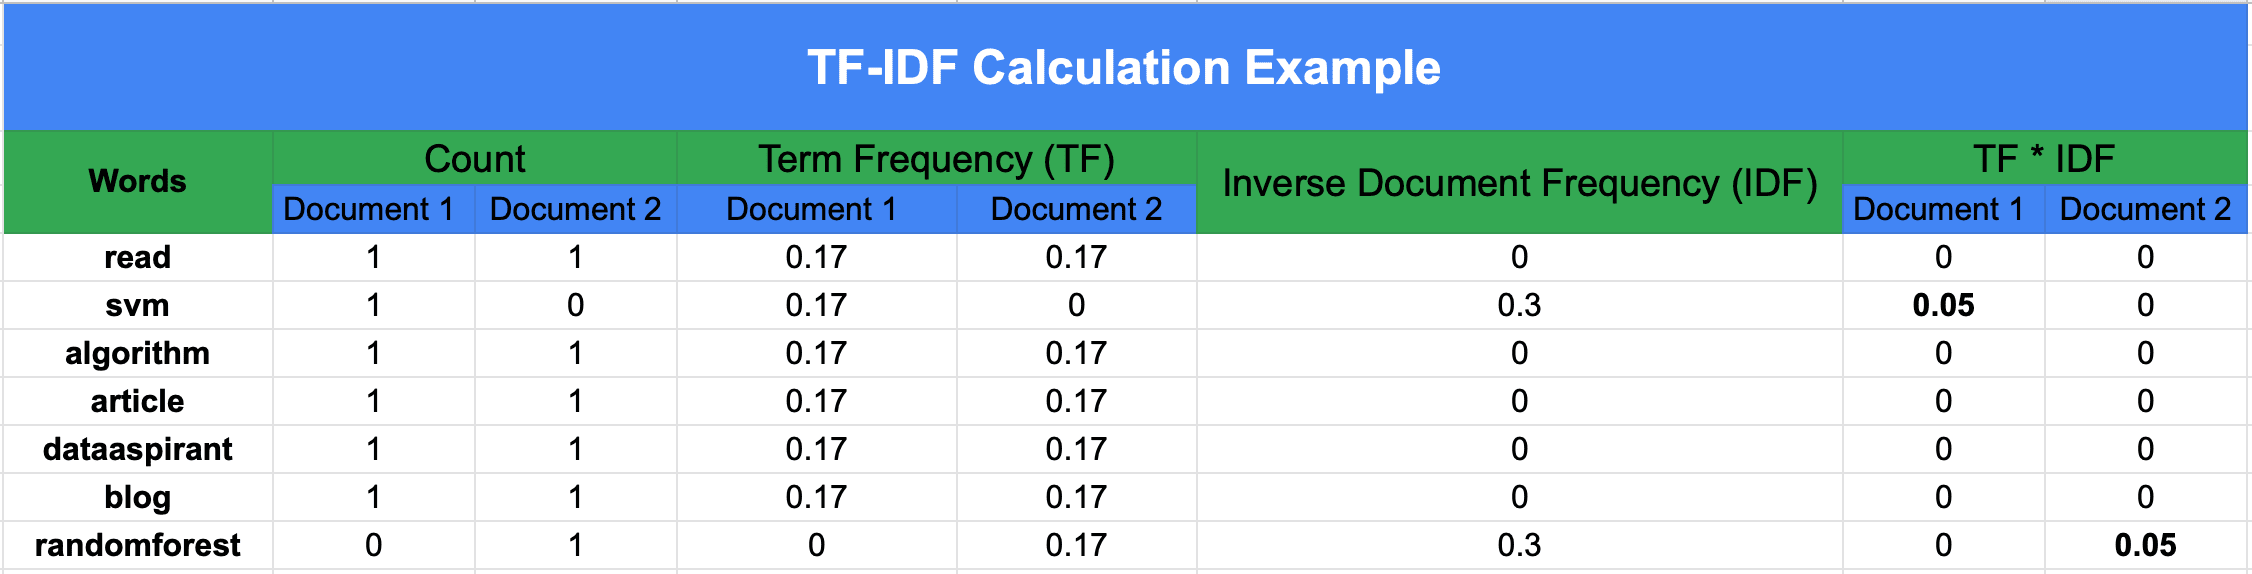 Term Frequency and Inverse Document Frequency Calculation